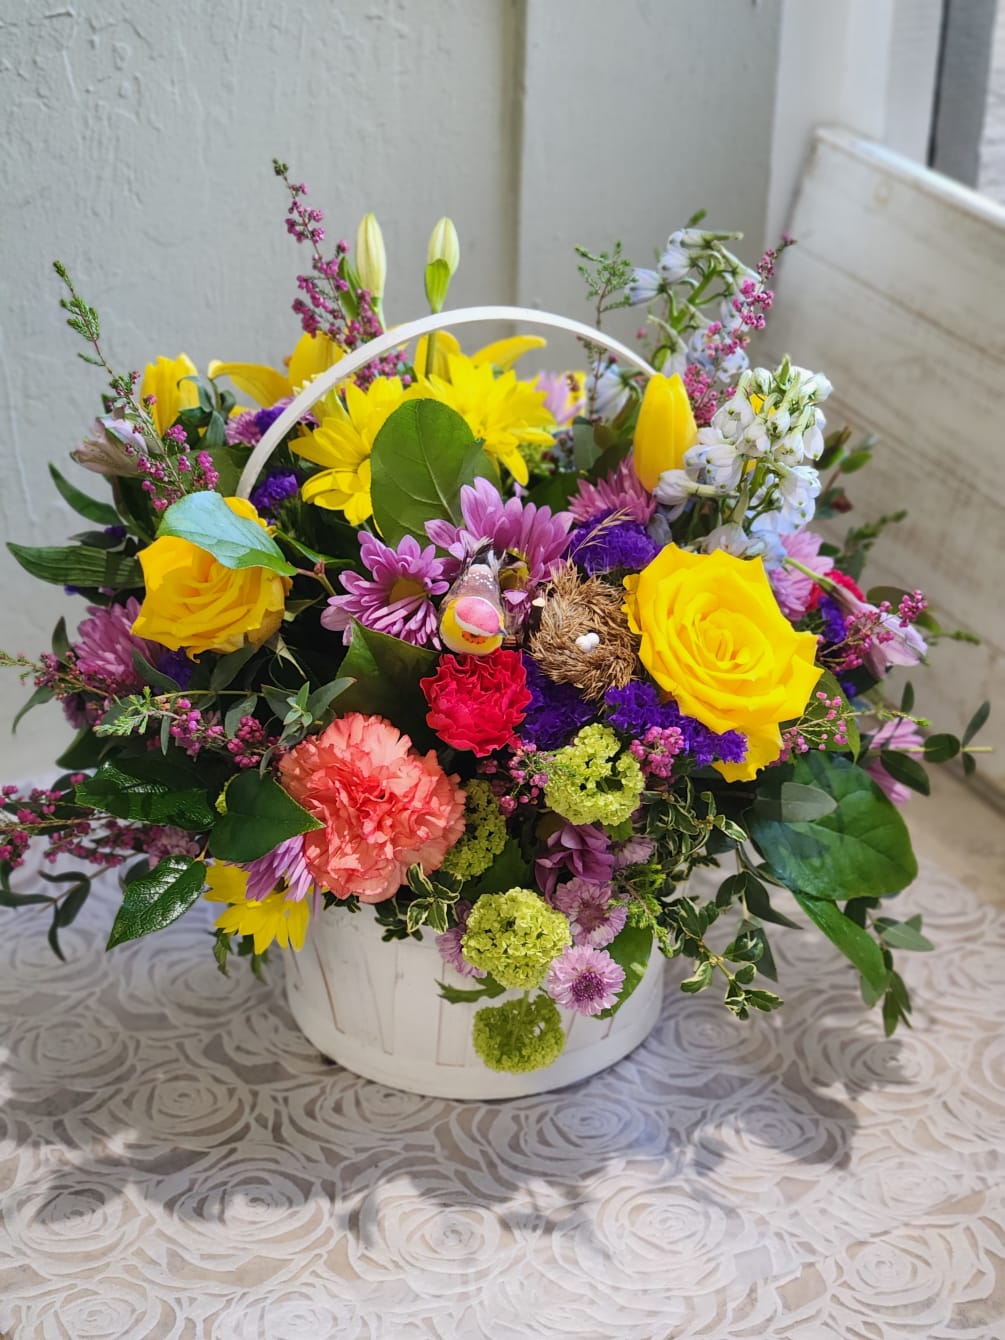 A cute spring basket with bright colors accented with curly willow and